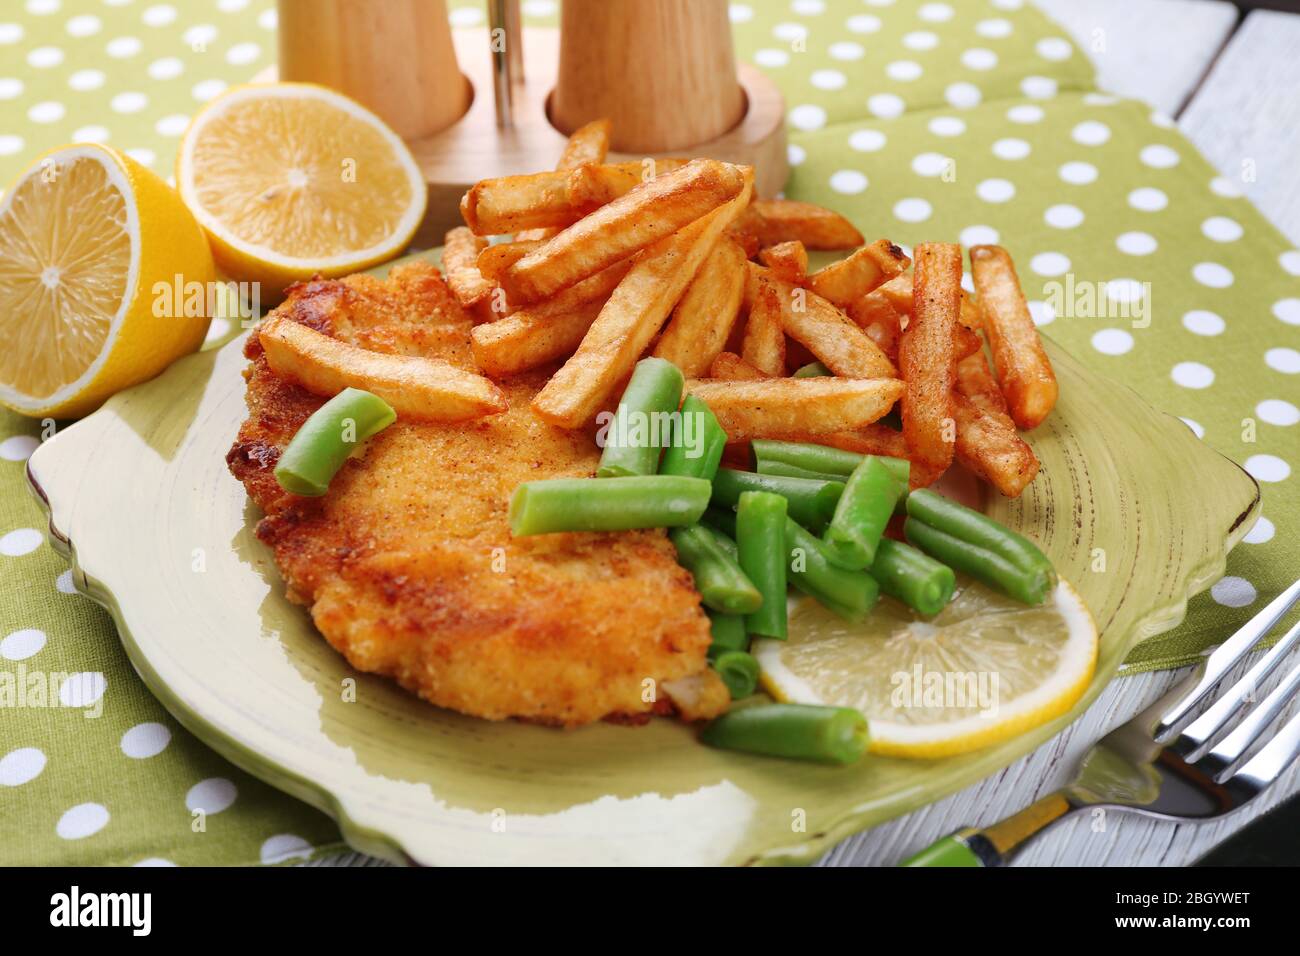 Breaded fried fish fillets and potatoes with asparagus and sliced lemon on plate and wooden planks background Stock Photo